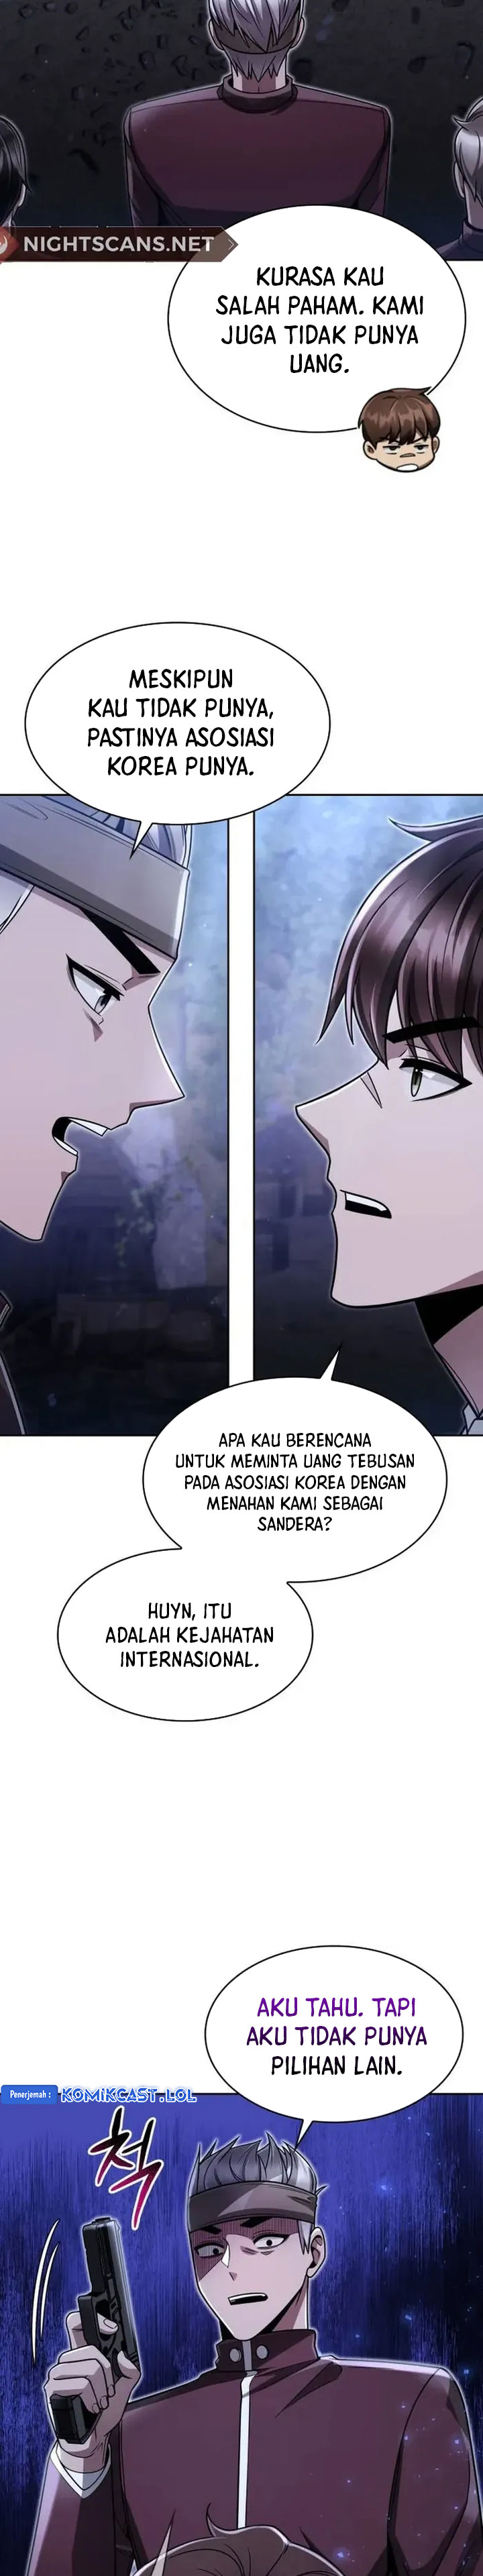 Dilarang COPAS - situs resmi www.mangacanblog.com - Komik clever cleaning life of the returned genius hunter 058 - chapter 58 59 Indonesia clever cleaning life of the returned genius hunter 058 - chapter 58 Terbaru 23|Baca Manga Komik Indonesia|Mangacan